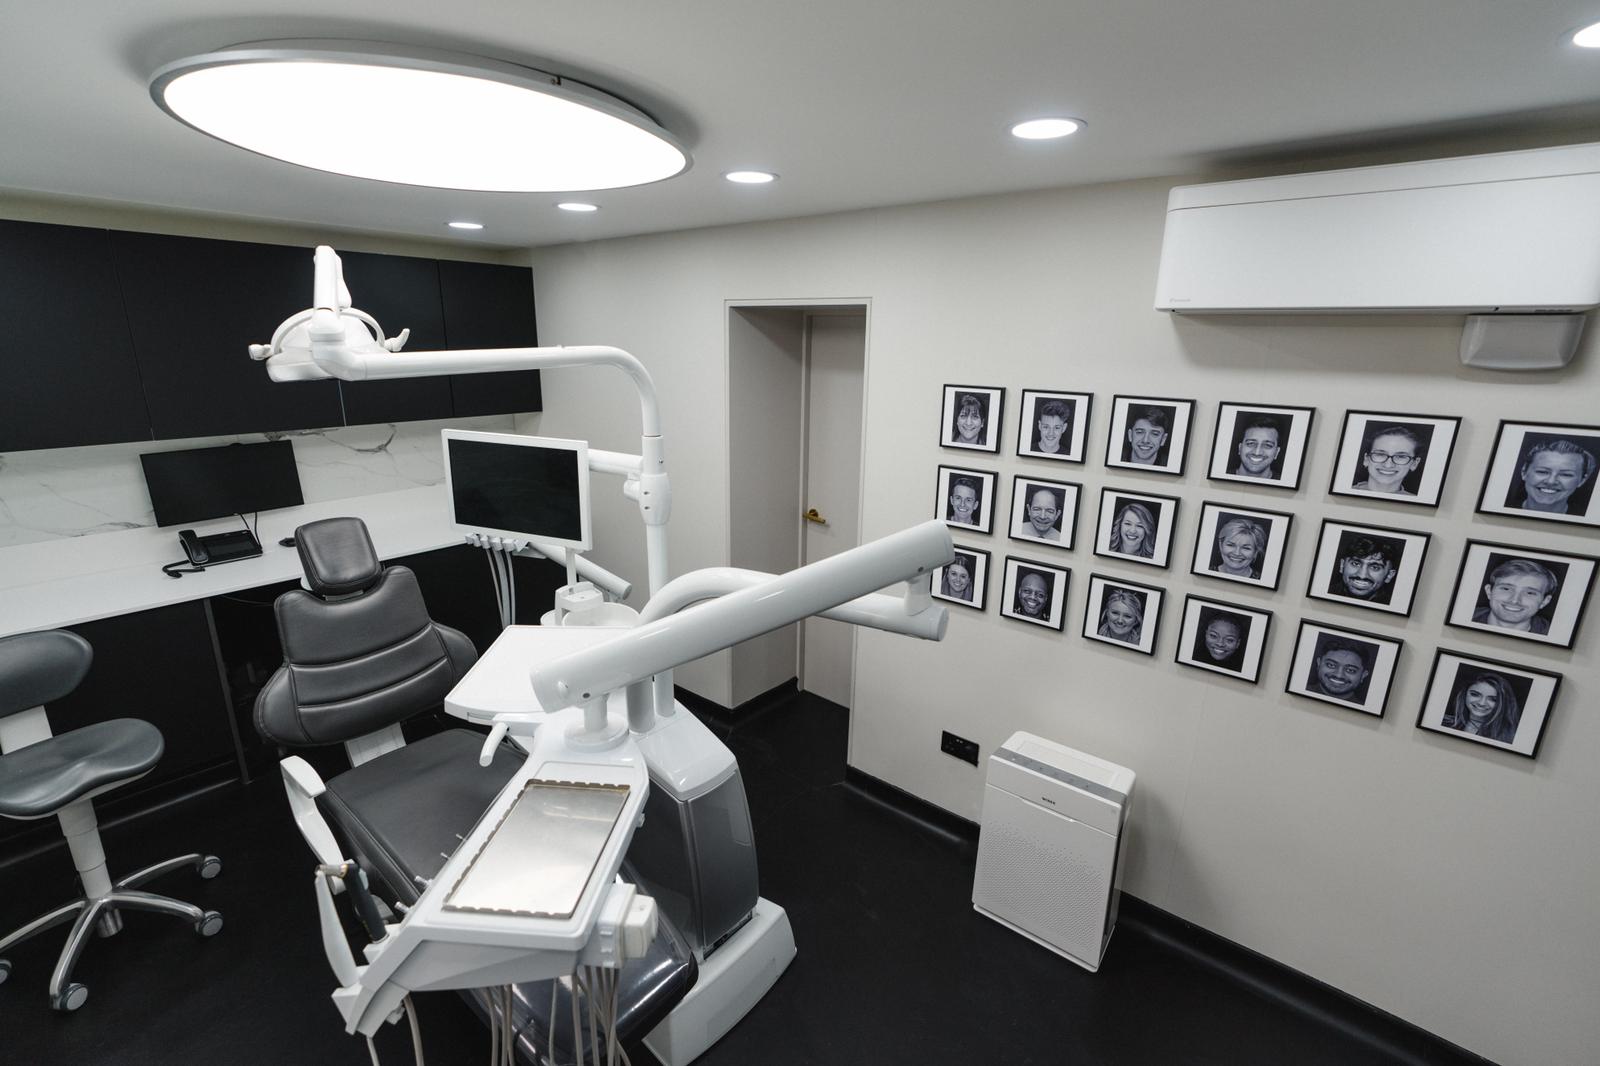 Take a look inside the new Freshdental Clinic and Institute